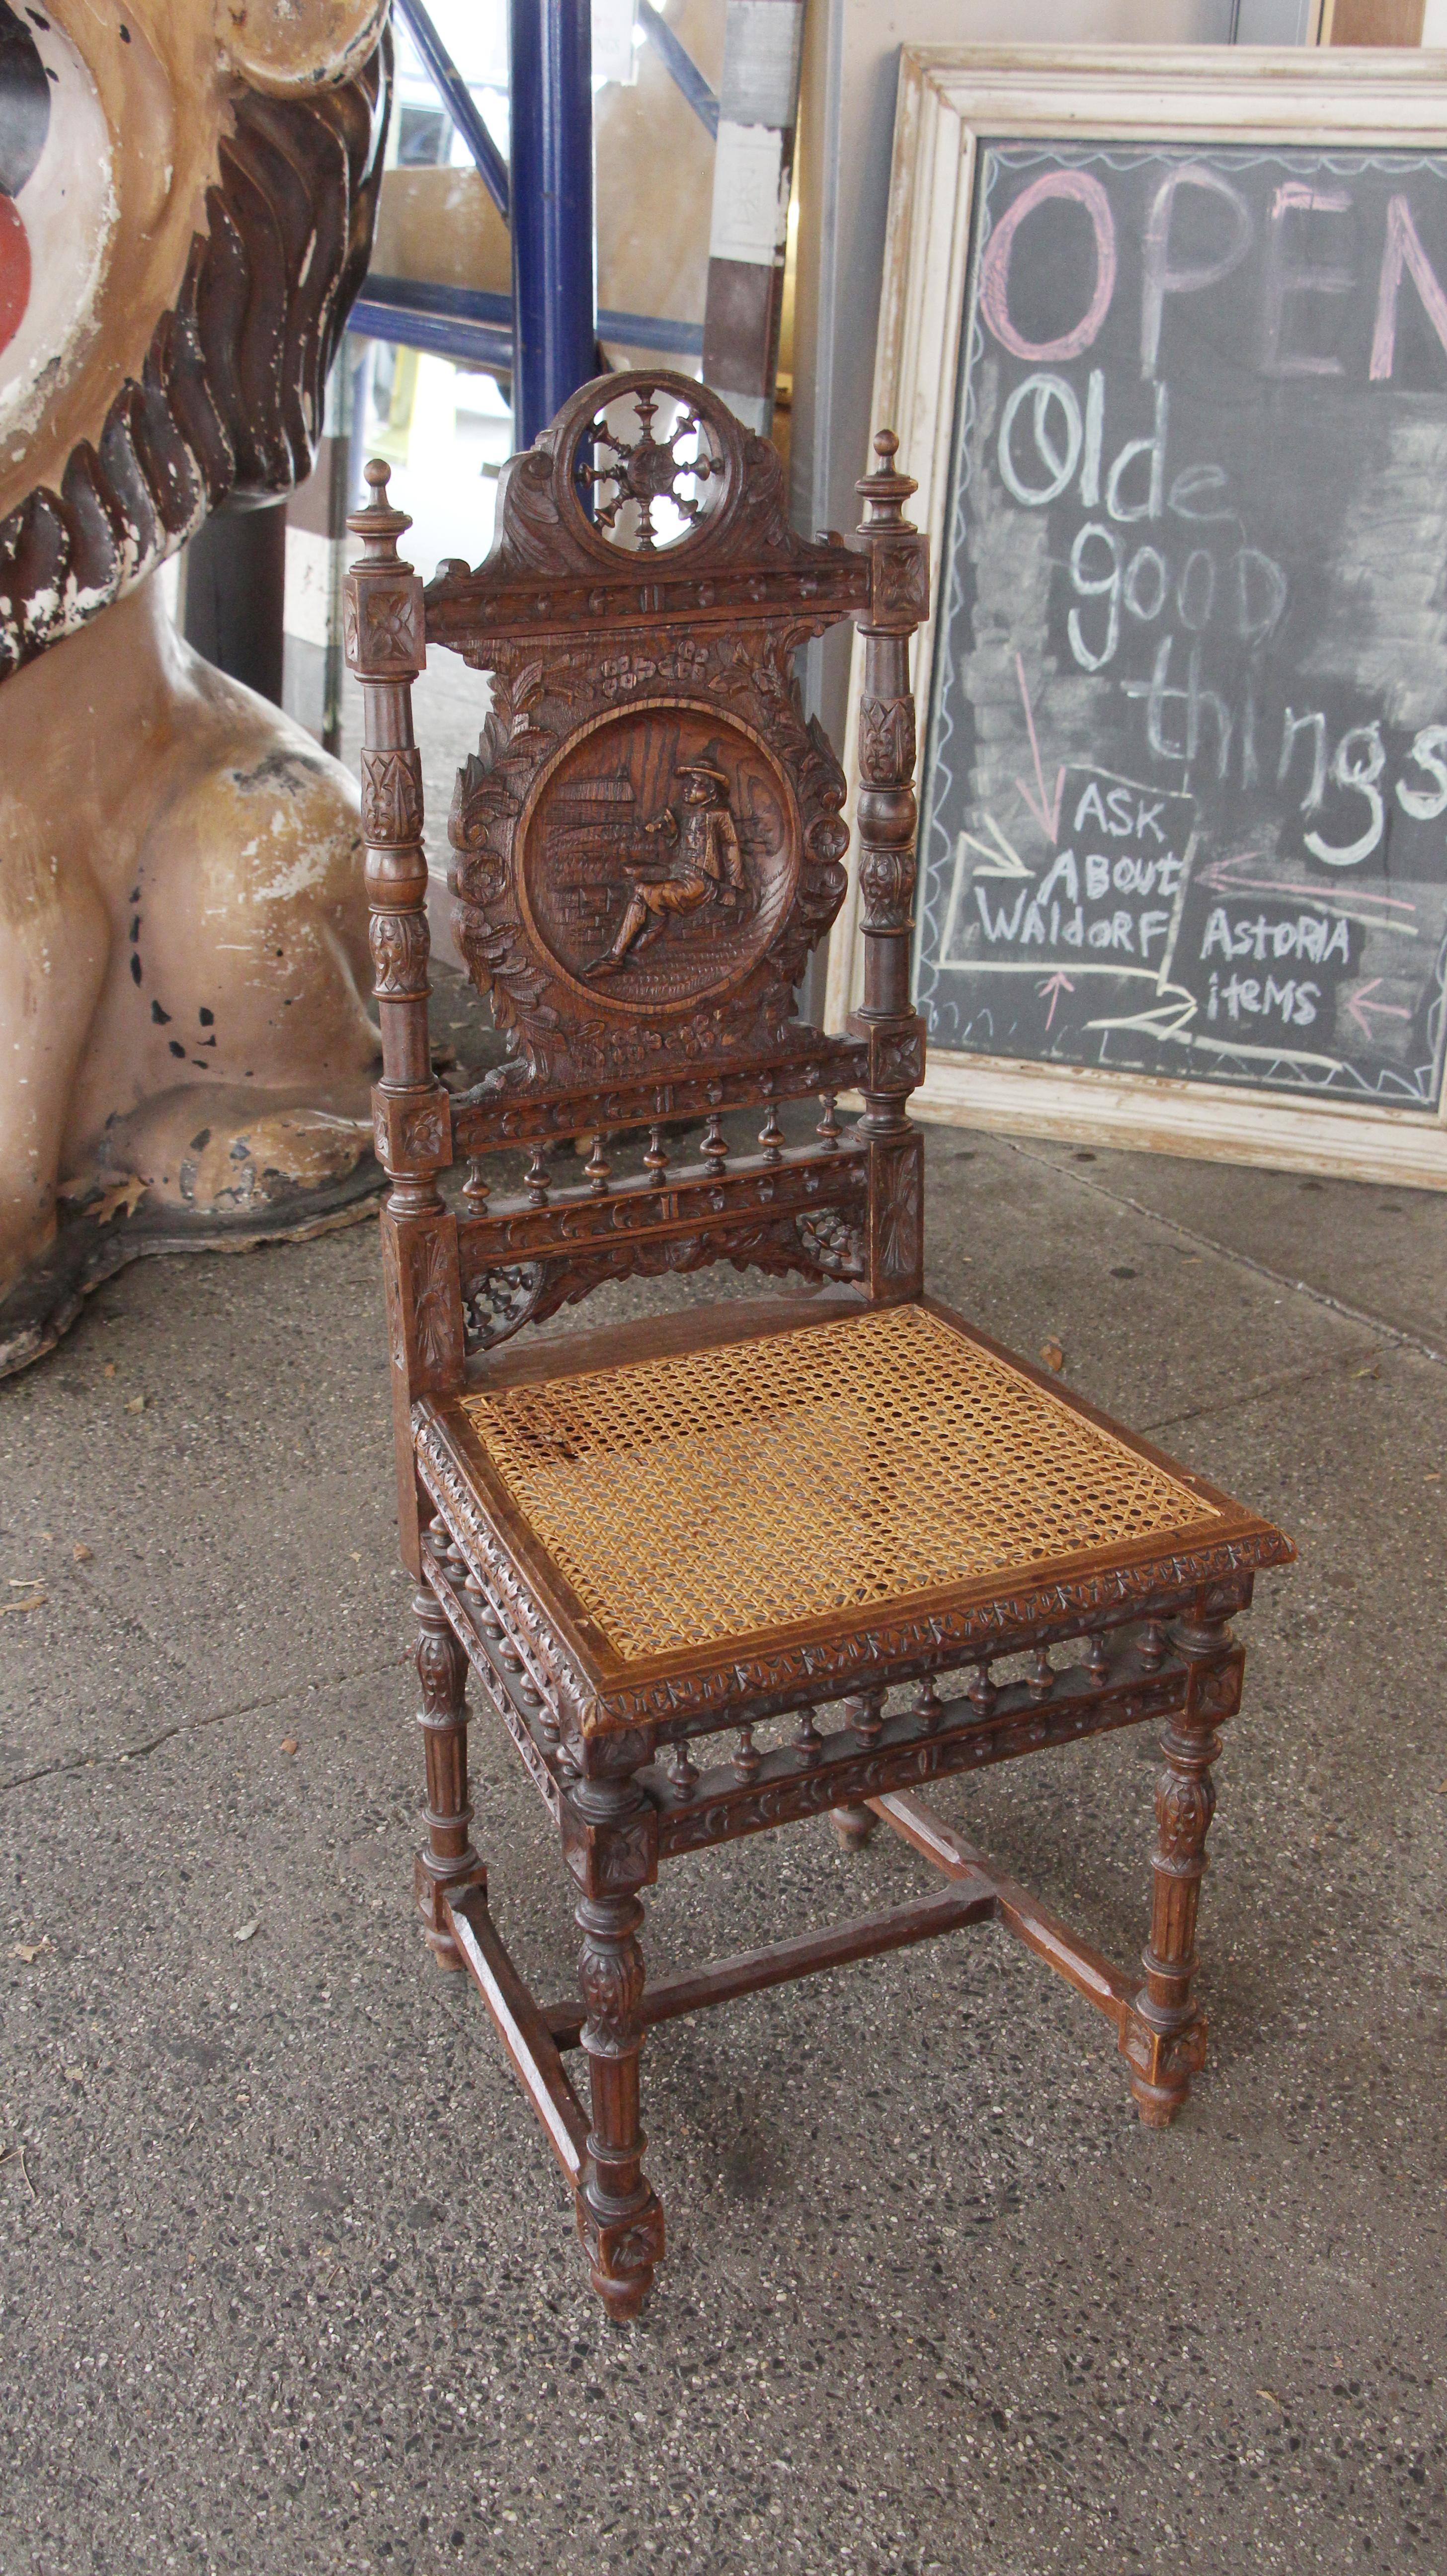 Dark wood tone carved English Renaissance style chairs with a wicker seat. Each chair back has a different carved figural scene. The set is in overall excellent condition, except one of the wicker seats has some damage. The wicker is not original to